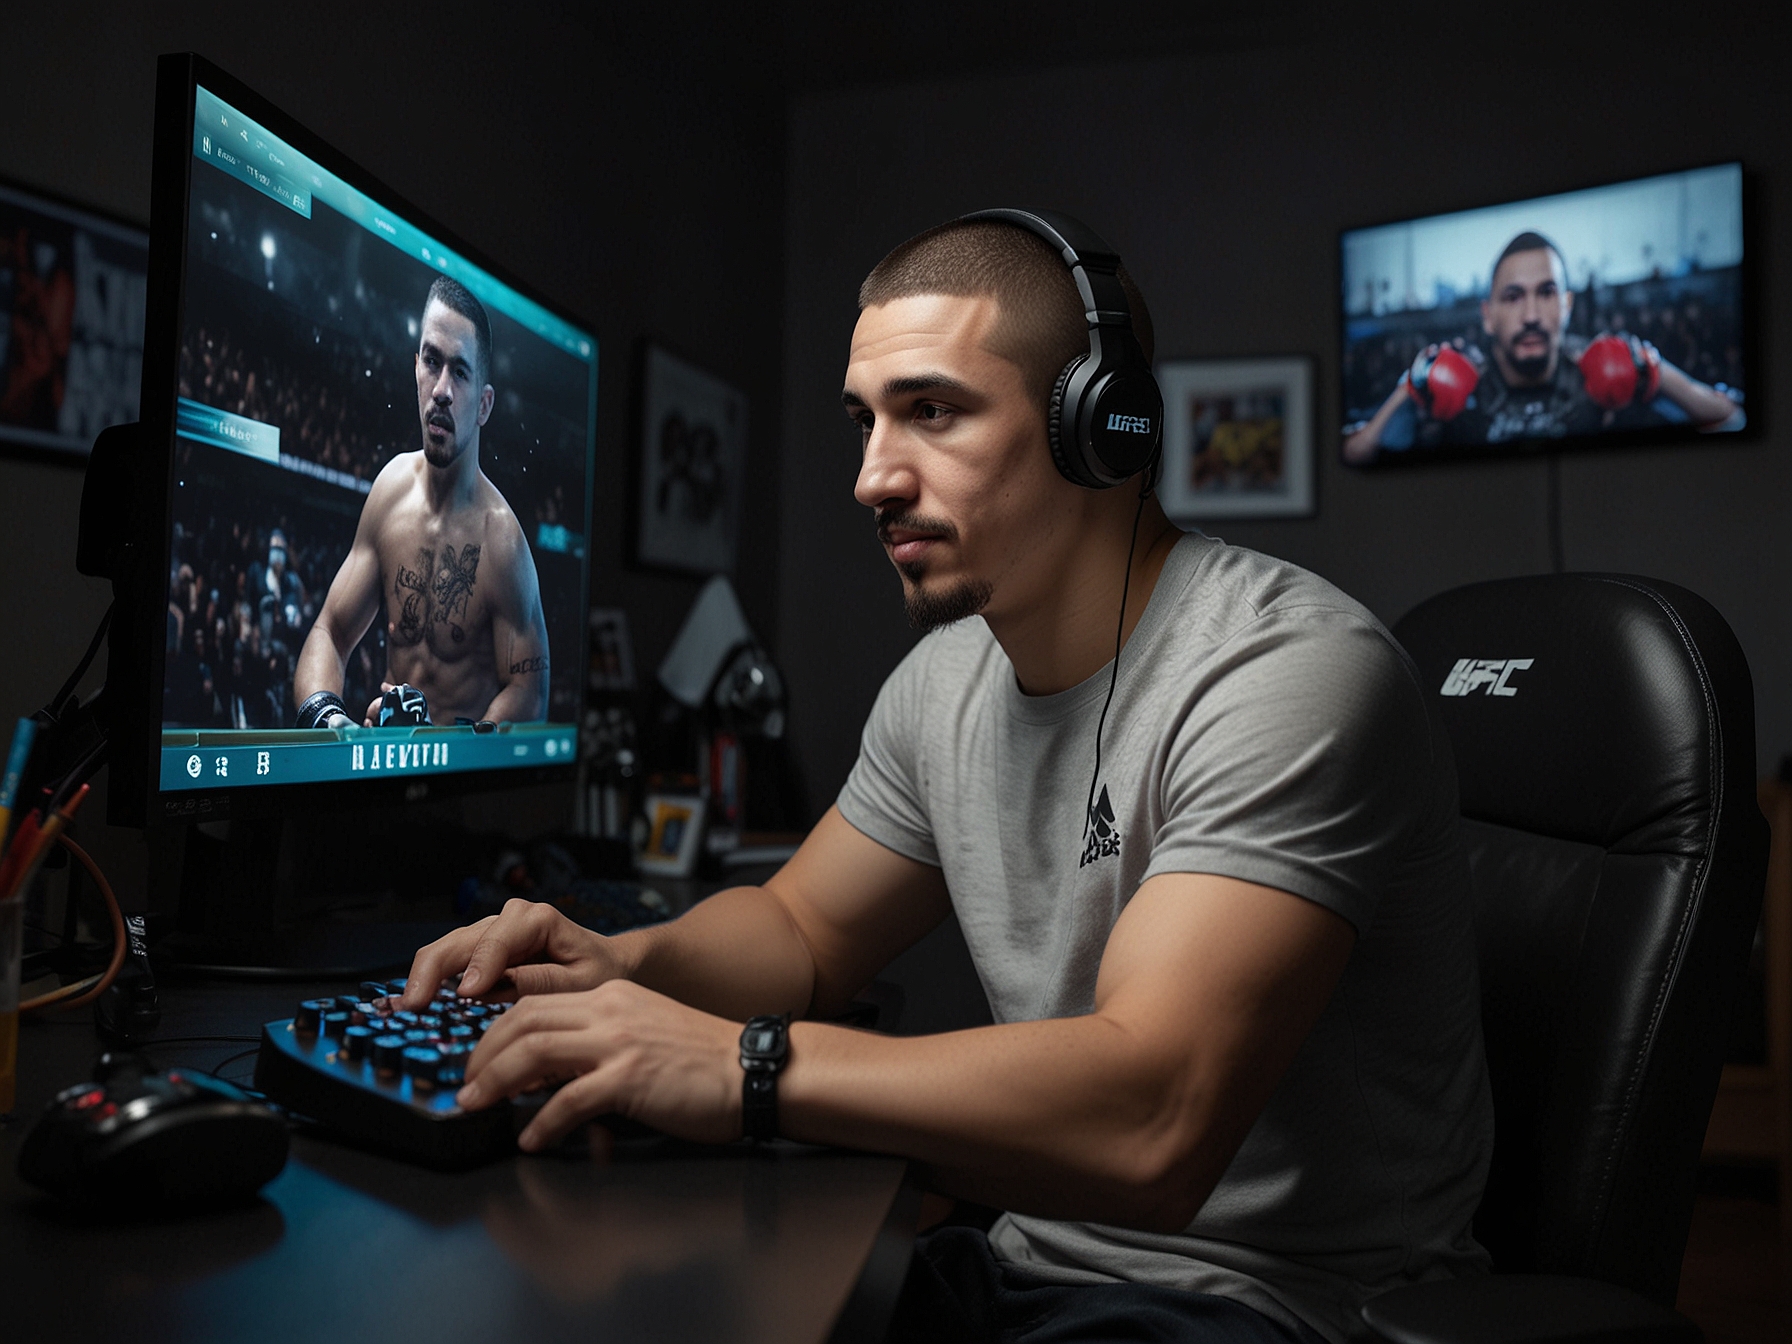 Robert Whittaker, wearing UFC gear, streaming a game to his fans on his high-tech gaming setup, illustrating his passion for gaming as a potential career post-UFC.